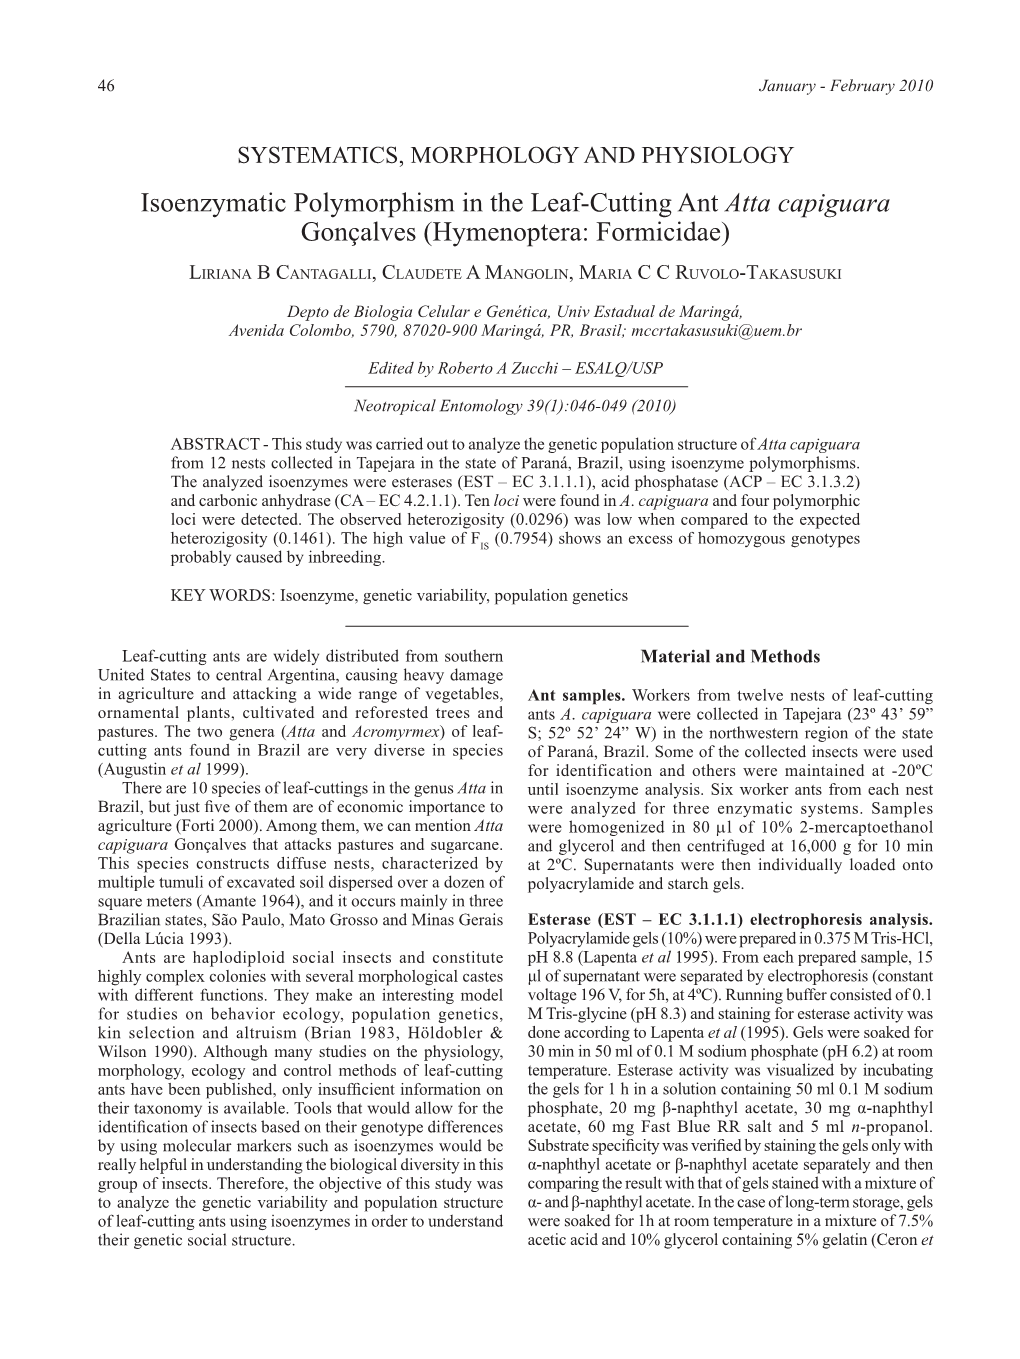 Isoenzymatic Polymorphism in the Leaf-Cutting Ant Atta Capiguara Gonçalves (Hymenoptera: Formicidae)